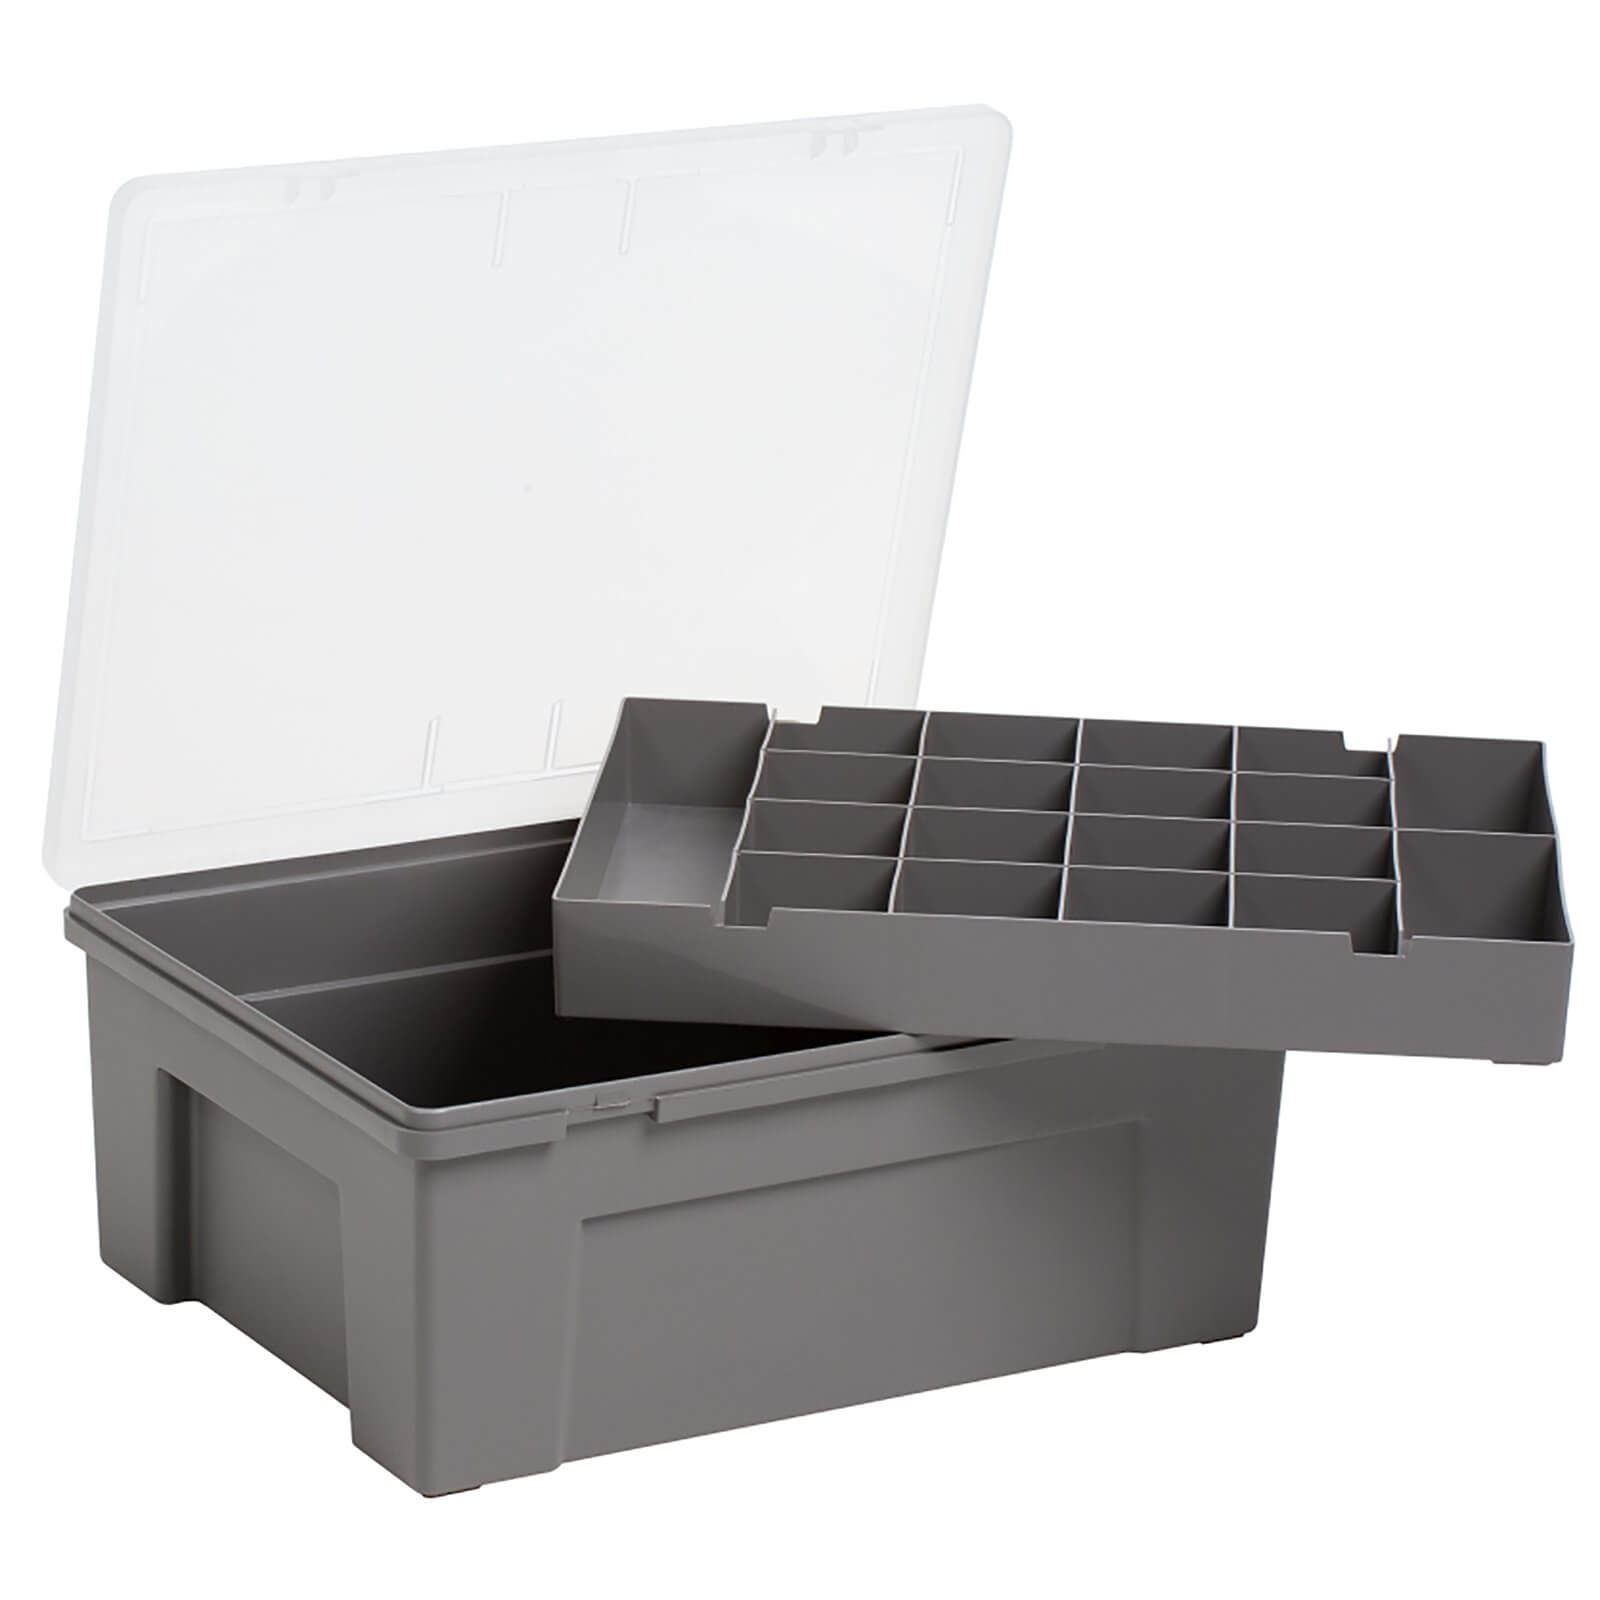 Organiser Tray with 19 Dividers - Grey